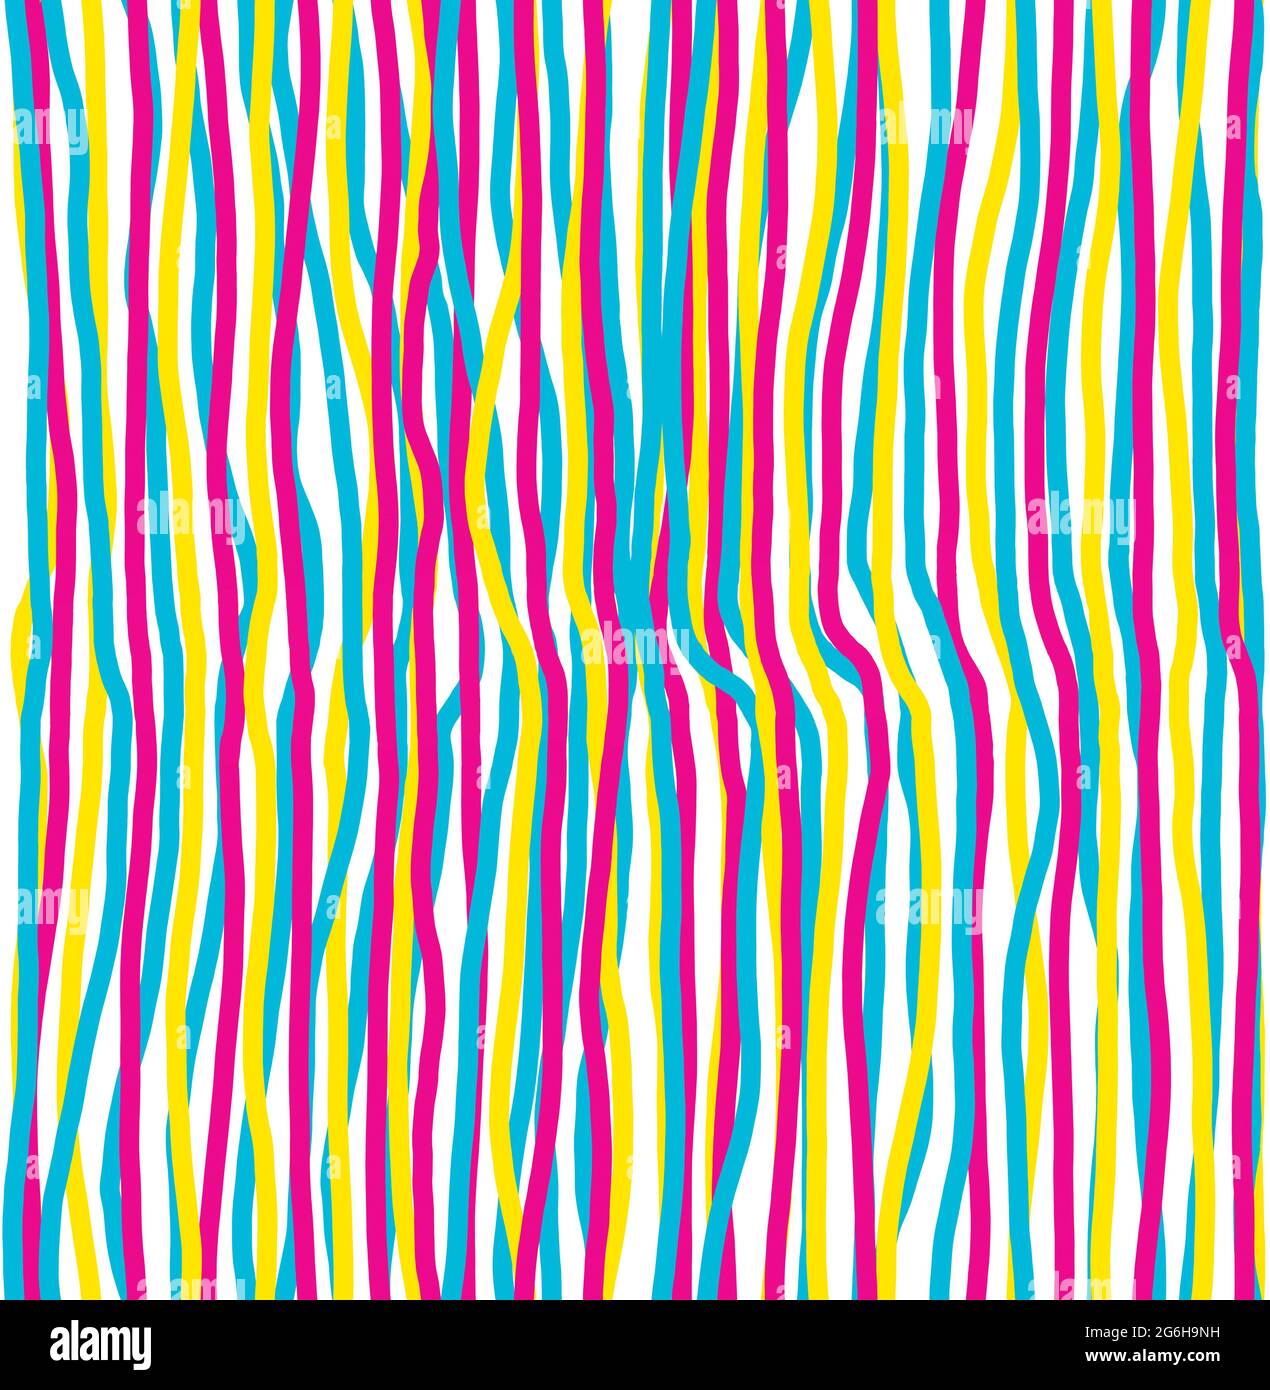 Abstract design of streamer-like vertical lines in red, yellow and blue forming a seamless repeatable pattern Stock Photo